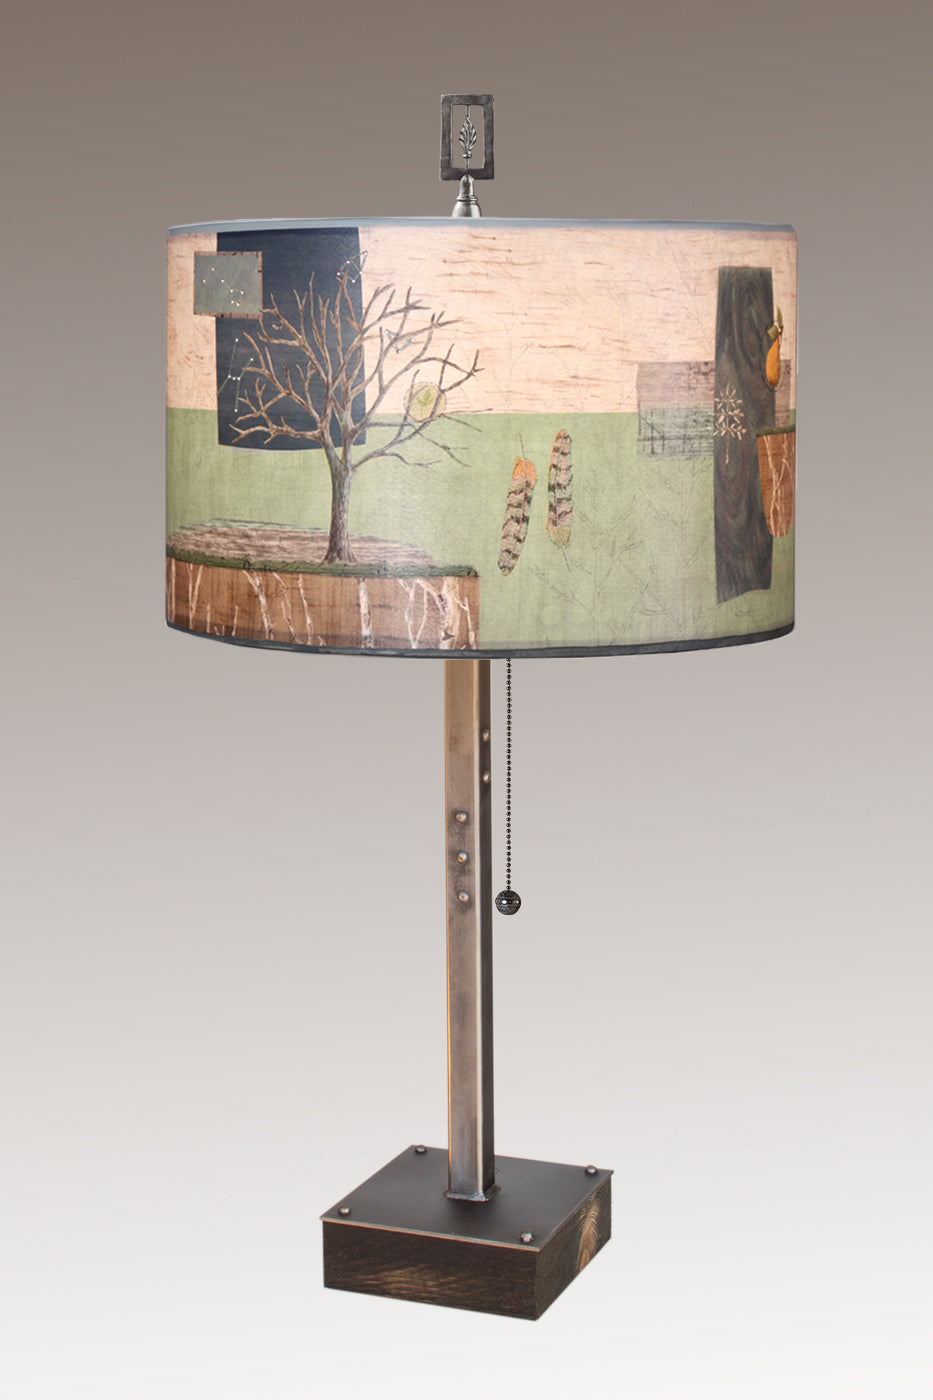 Janna Ugone & Co Table Lamps Steel Table Lamp on Wood with Large Drum Shade in Wander in Field